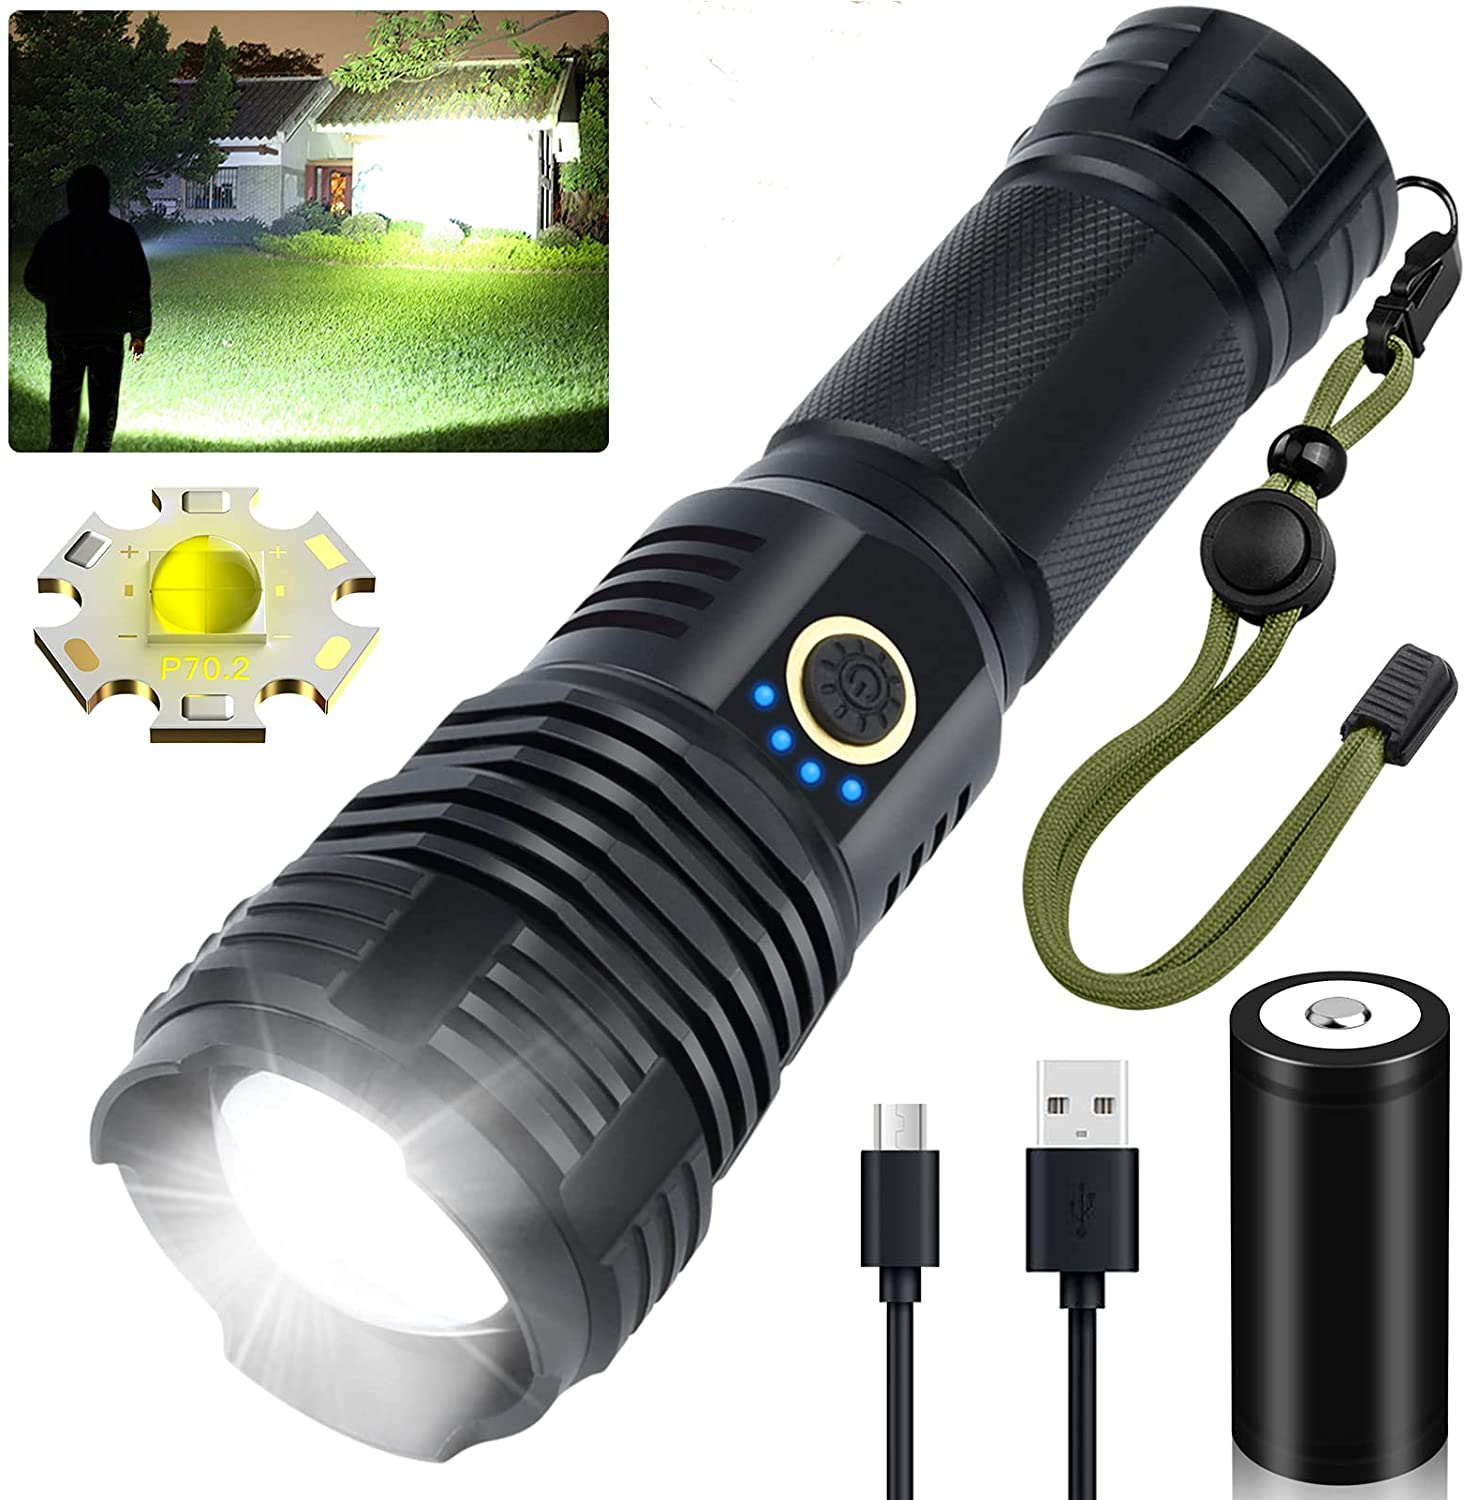 Rechargeable LED Flashlights High Lumens, 9000 Lumens Super Brgiht Tactical  Flashlights, Flash Light Powered 26650 Battery  XHP70.2, Zoomable  Waterproof  Flashlights for Emergencies, Camping